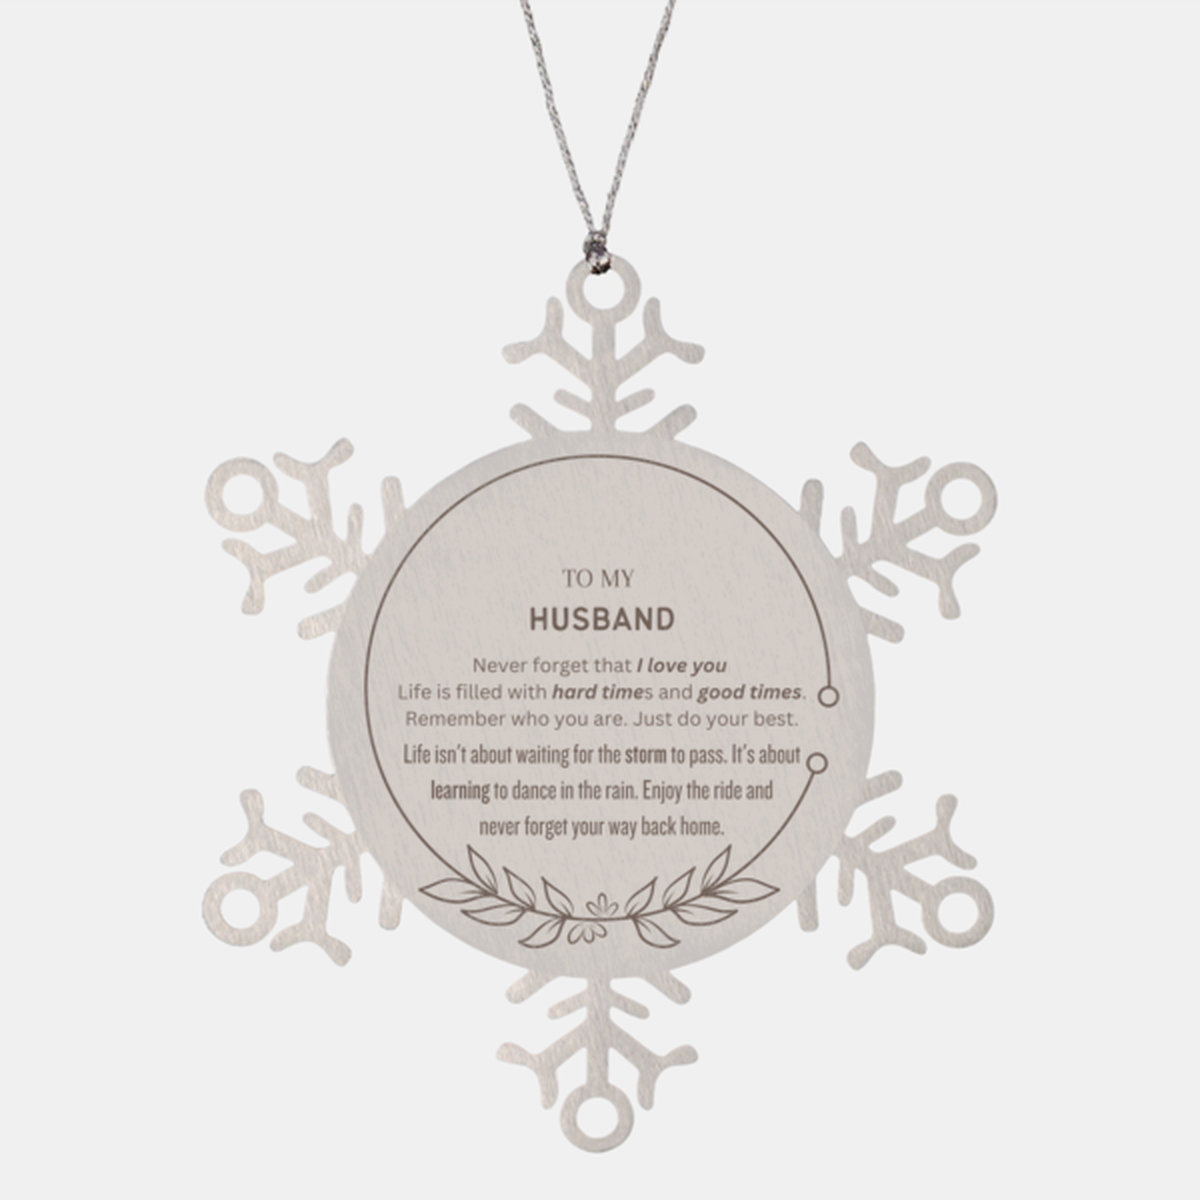 Christmas Husband Snowflake Ornament Gifts, To My Husband Thank You Gifts For Husband, Xmas Decorations Unique Gifts For Husband To My Husband Never forget that I love you life is filled with hard times and good times. Remember who you are. Just do your b